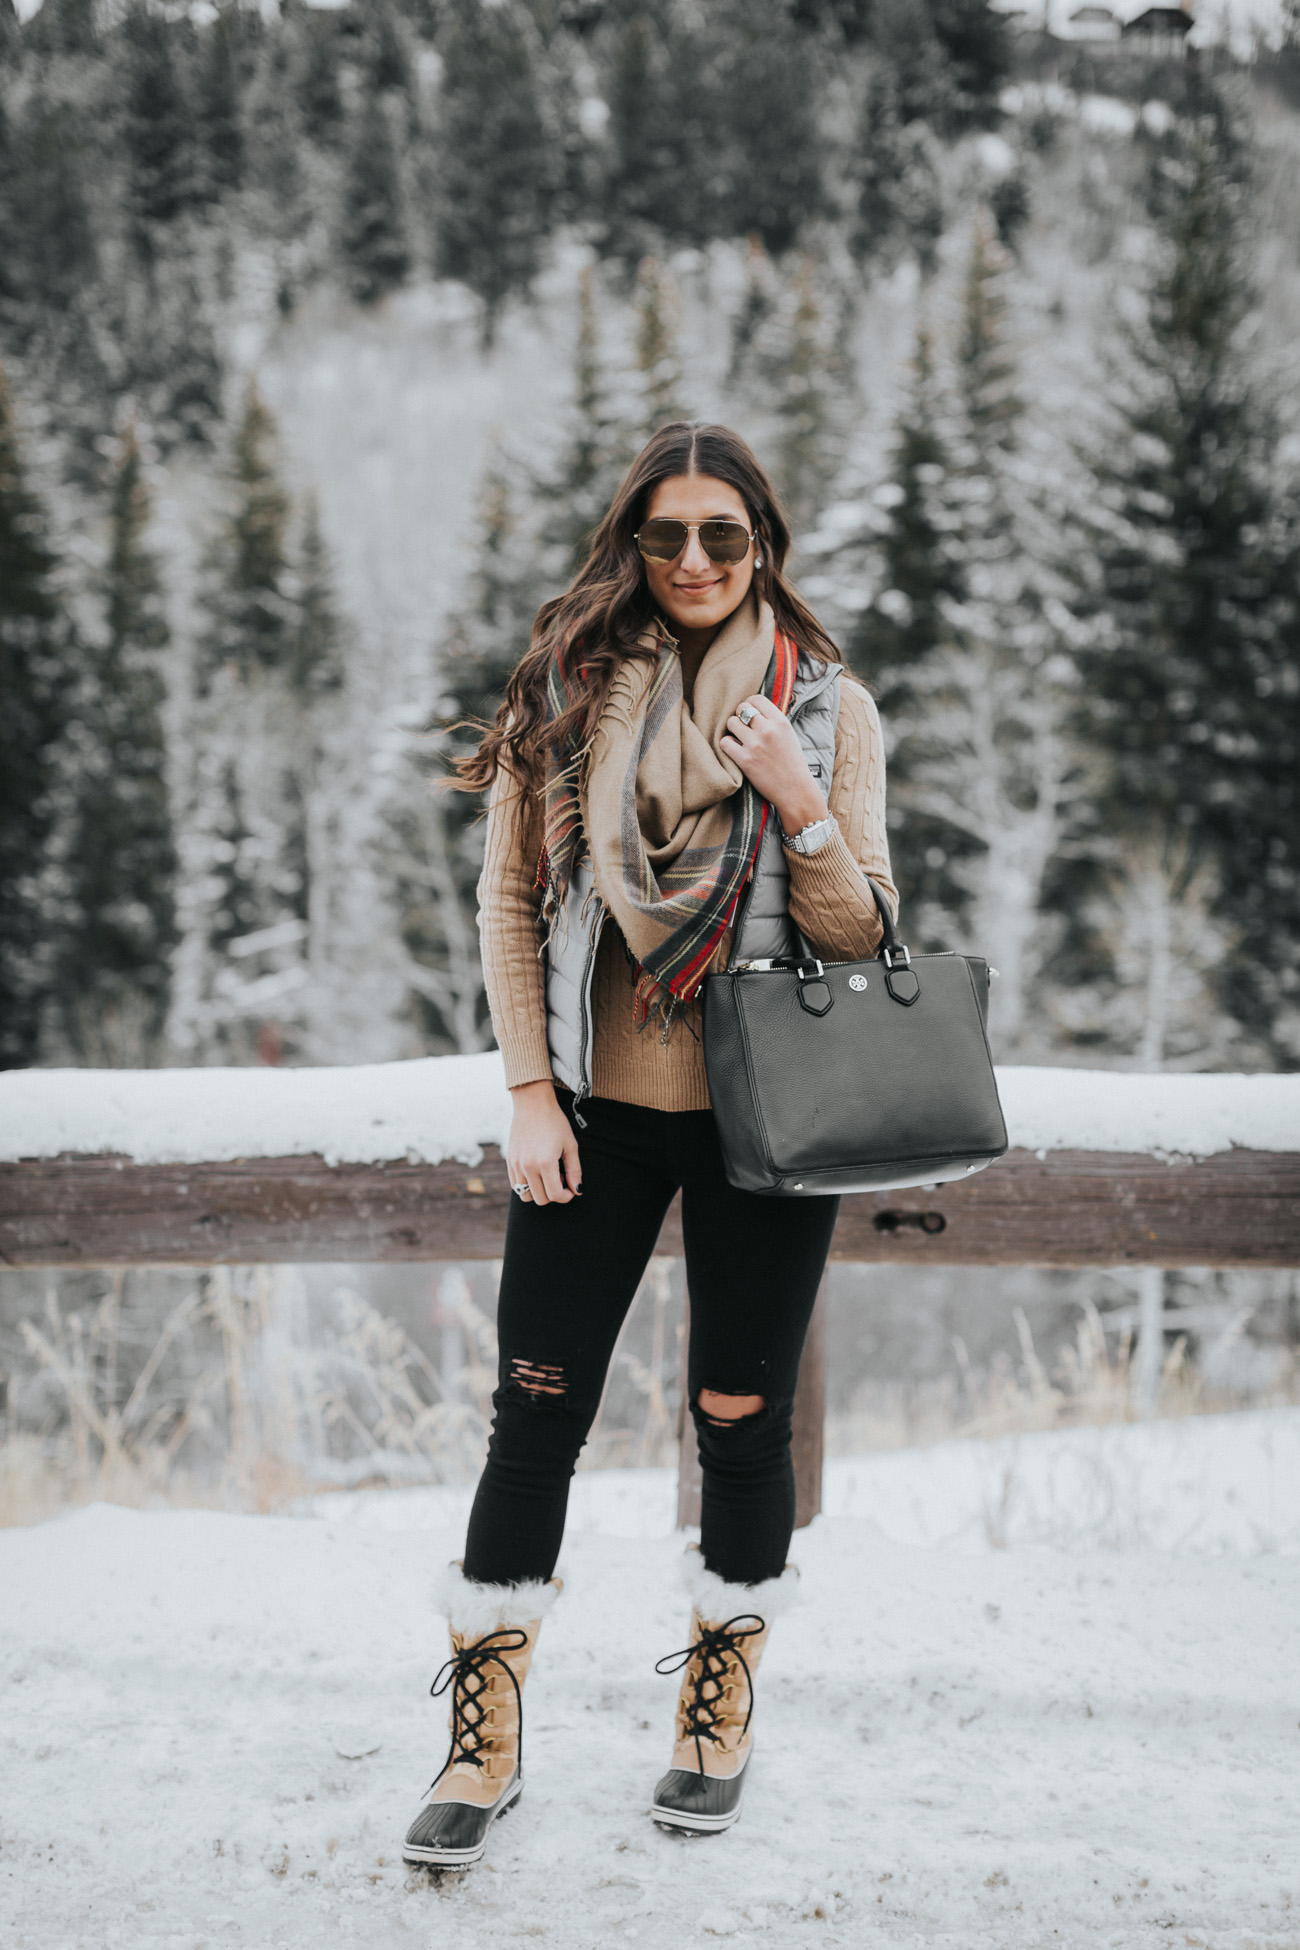 https://asoutherndrawl.com/wp-content/uploads/2017/01/chic-winter-outfit-1.jpg